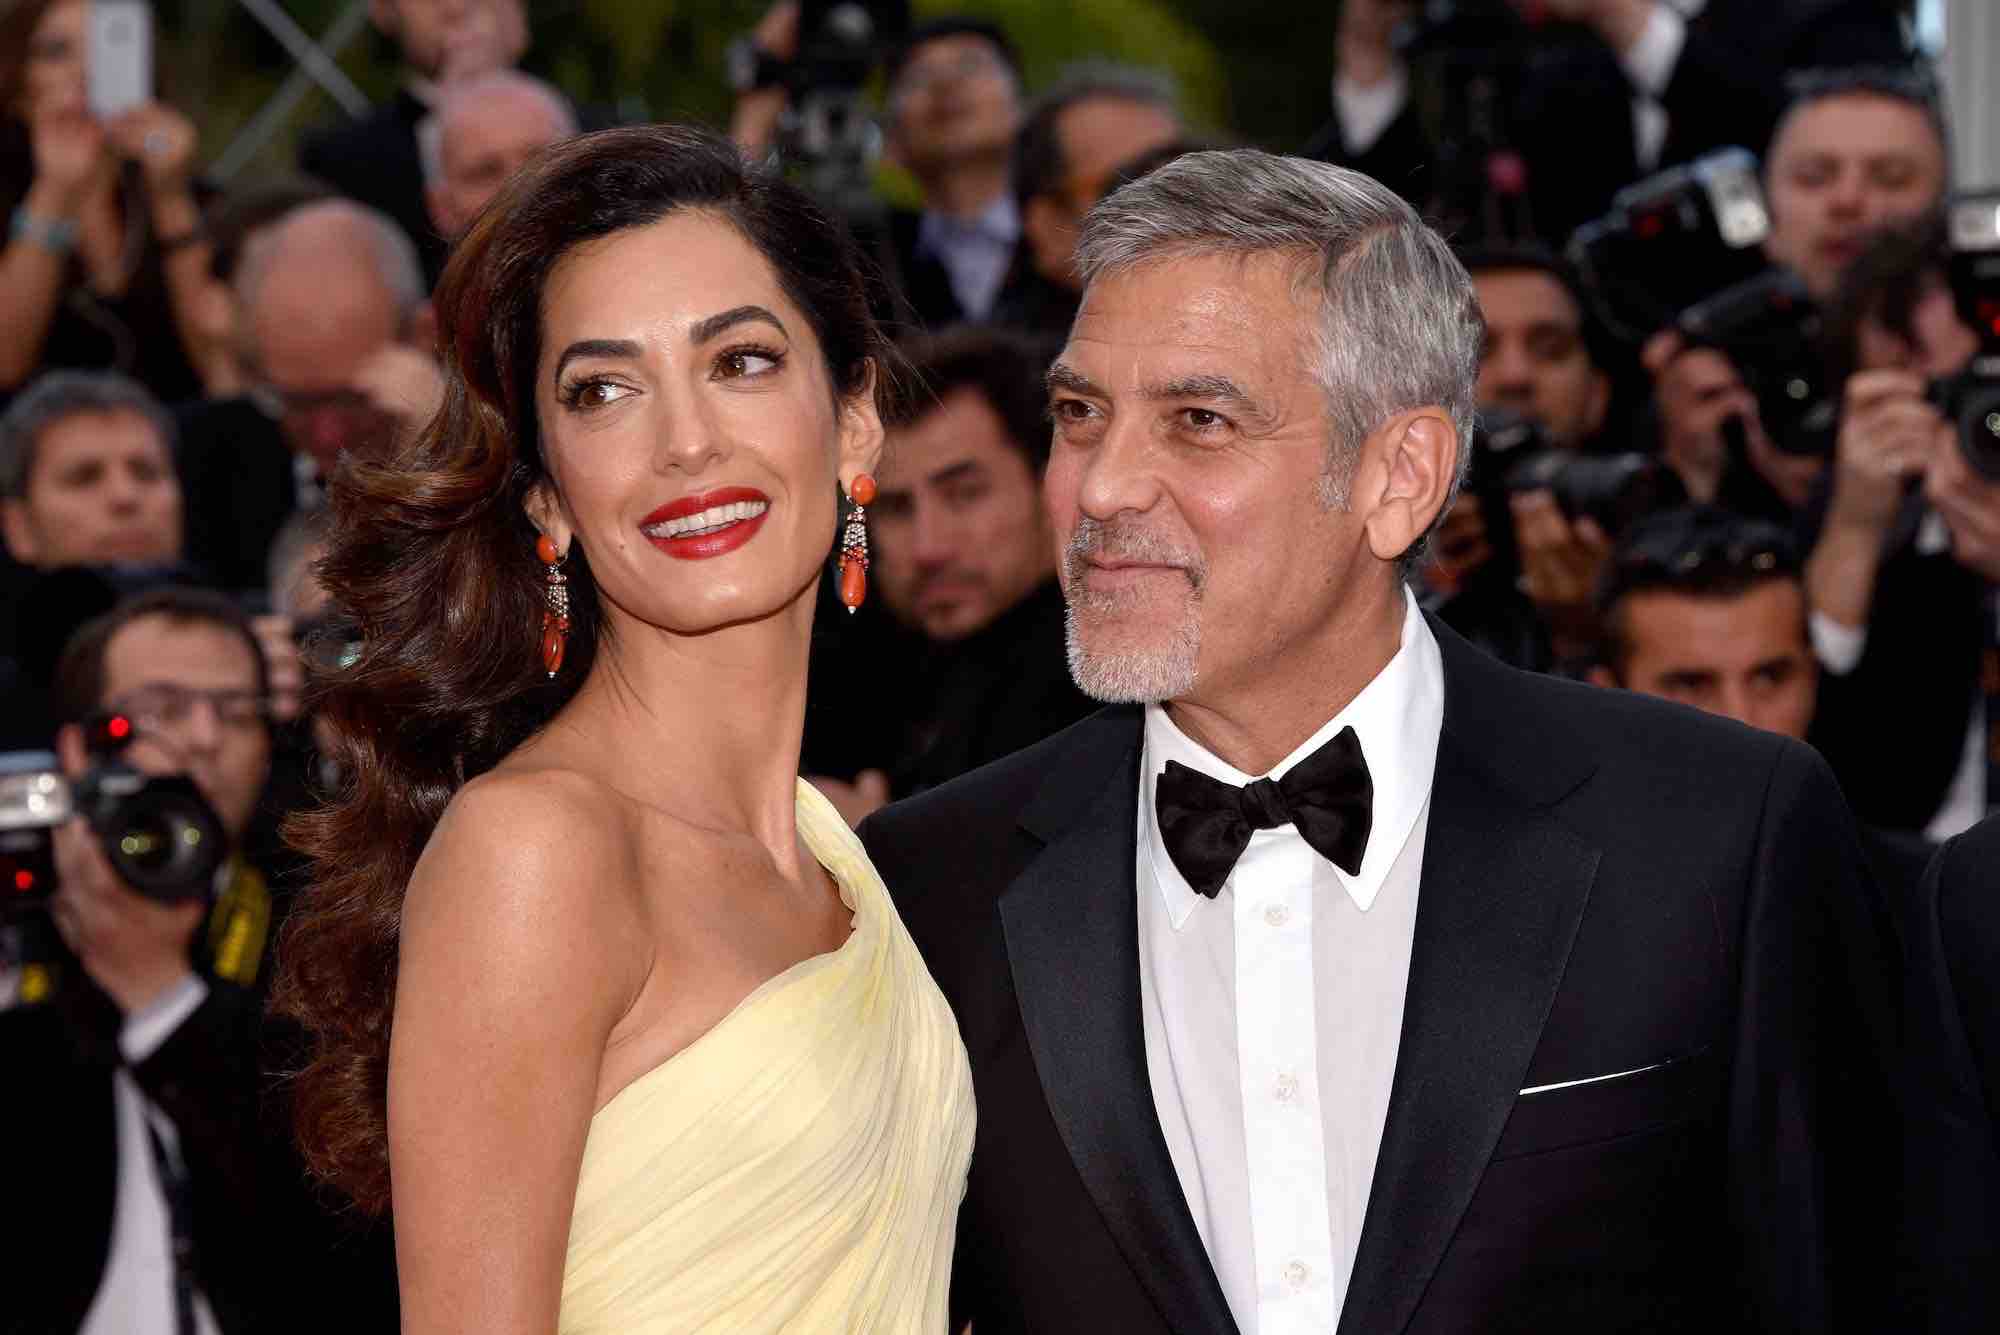 Are Clooney and his wife saving their marriage in quarantine